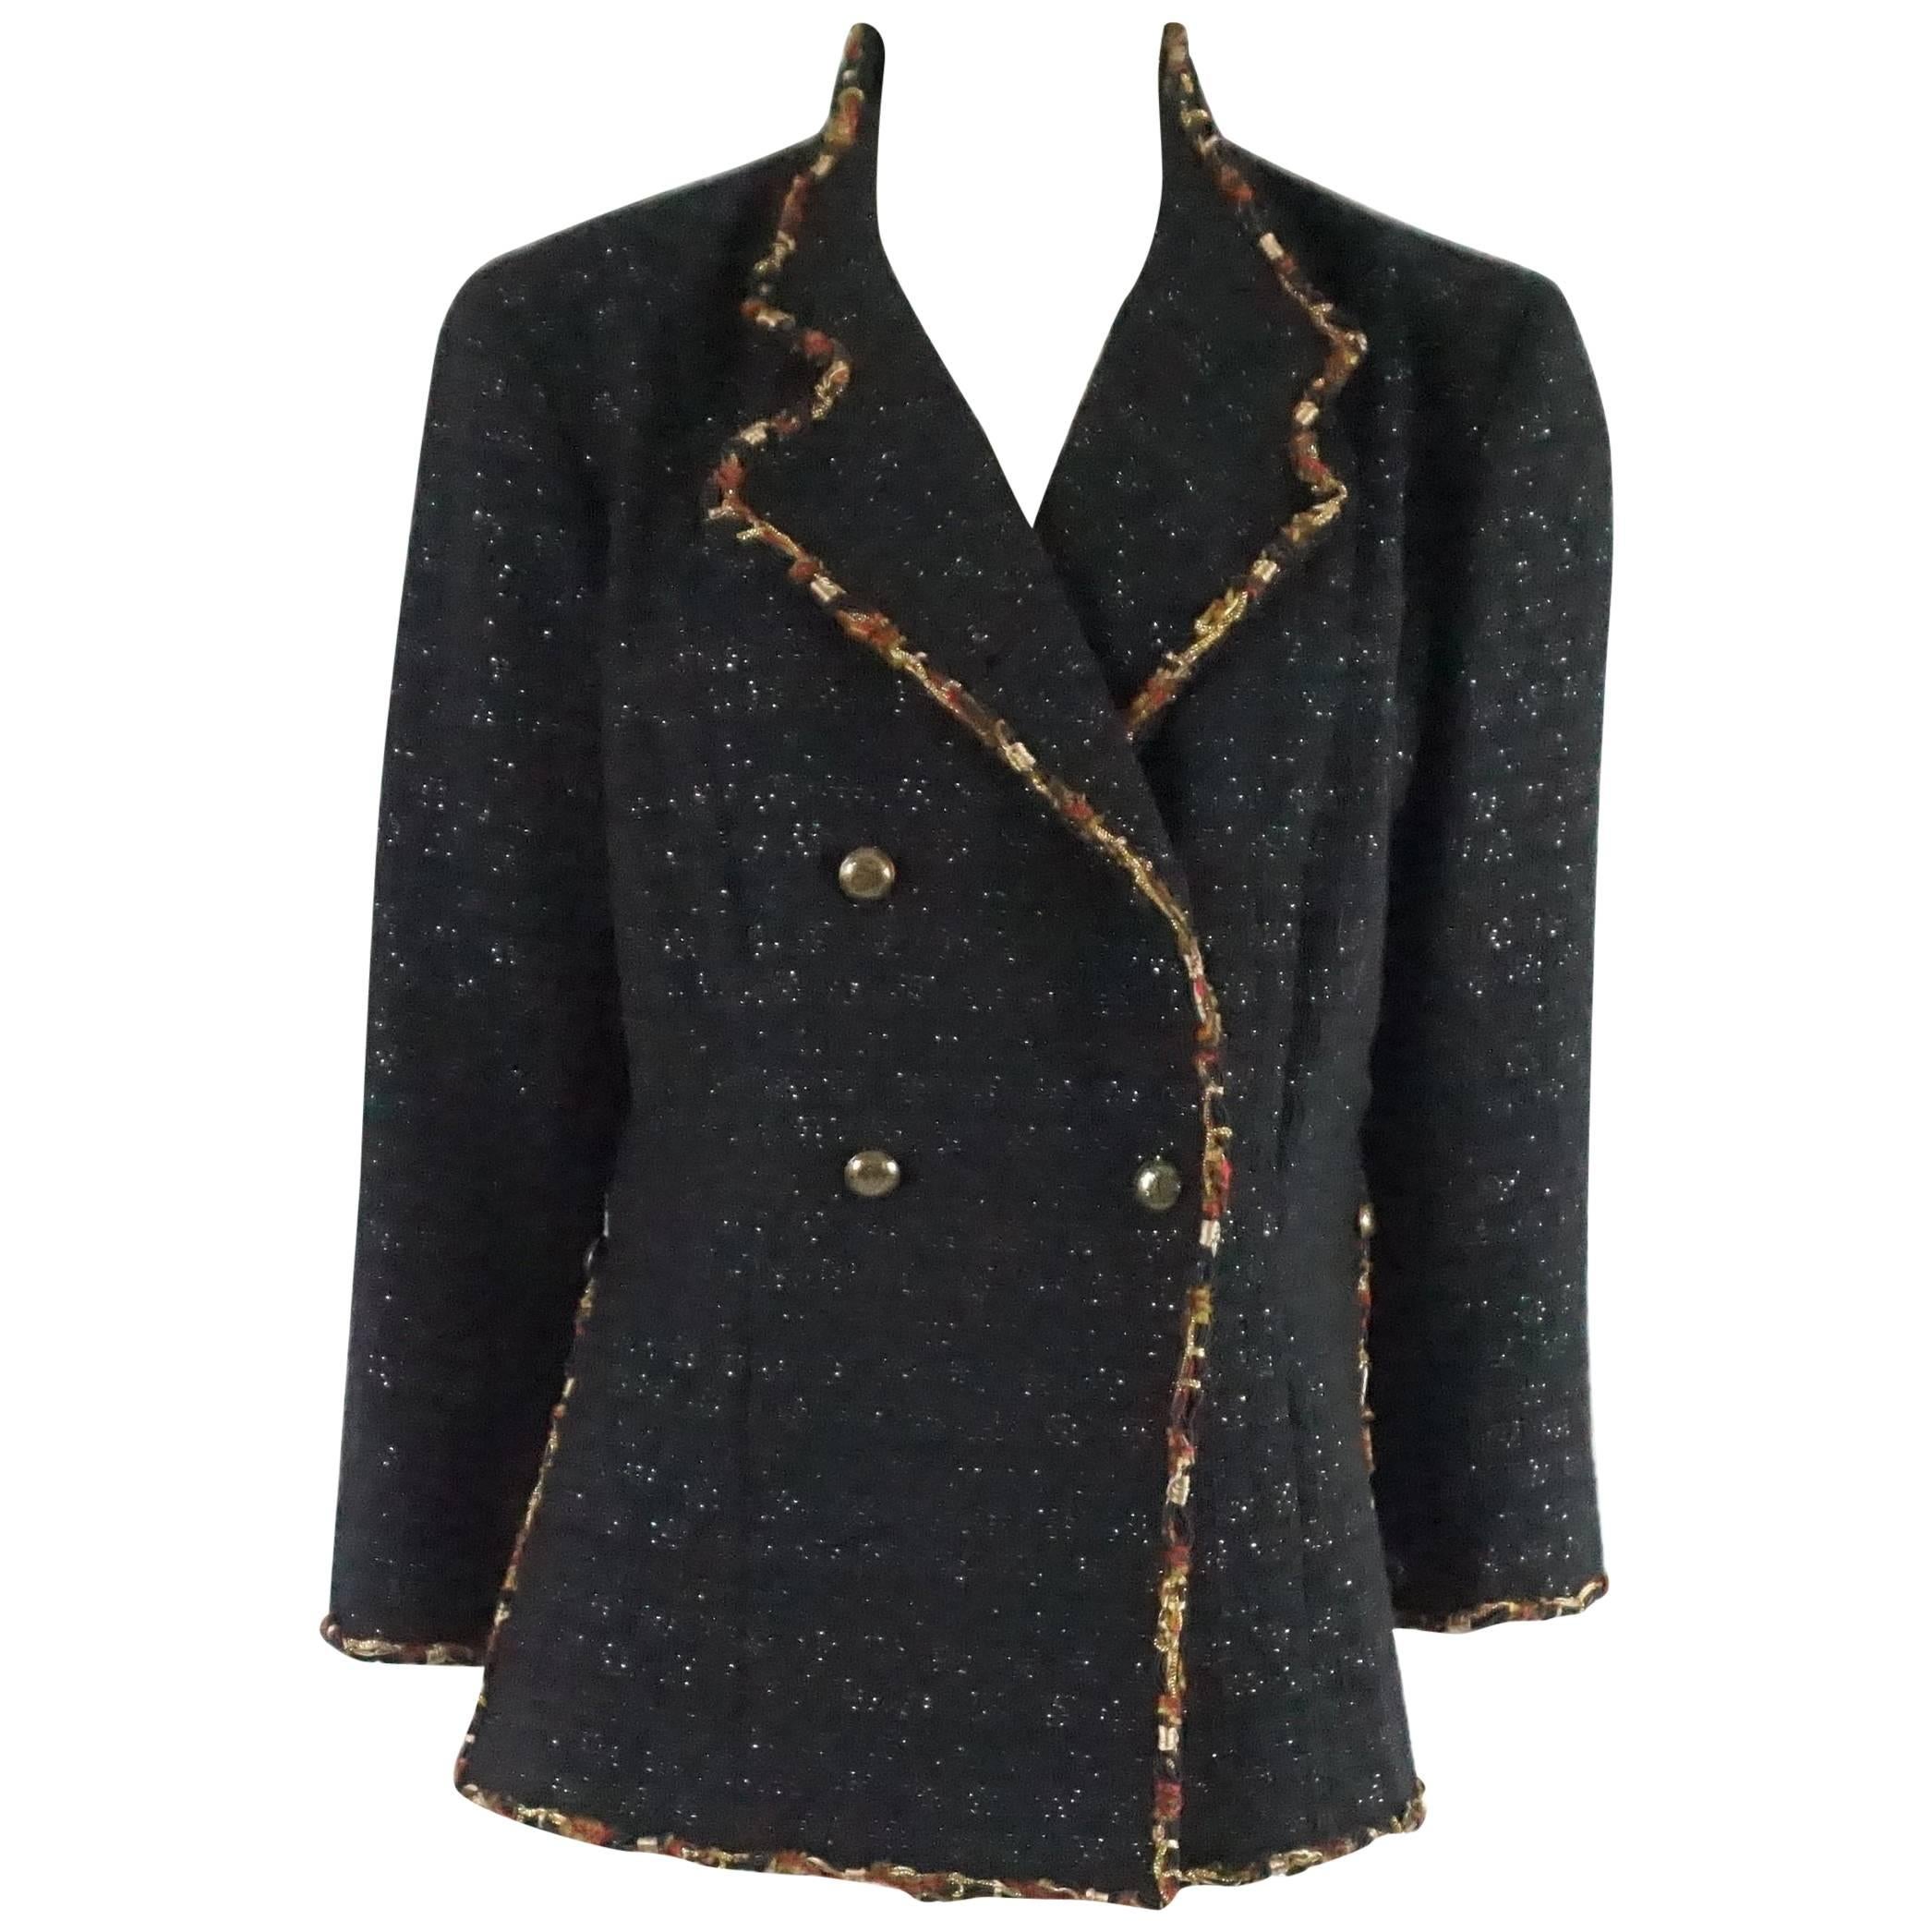 Chanel Black Wool Jacket with Amber Chain Trim, Size 42  